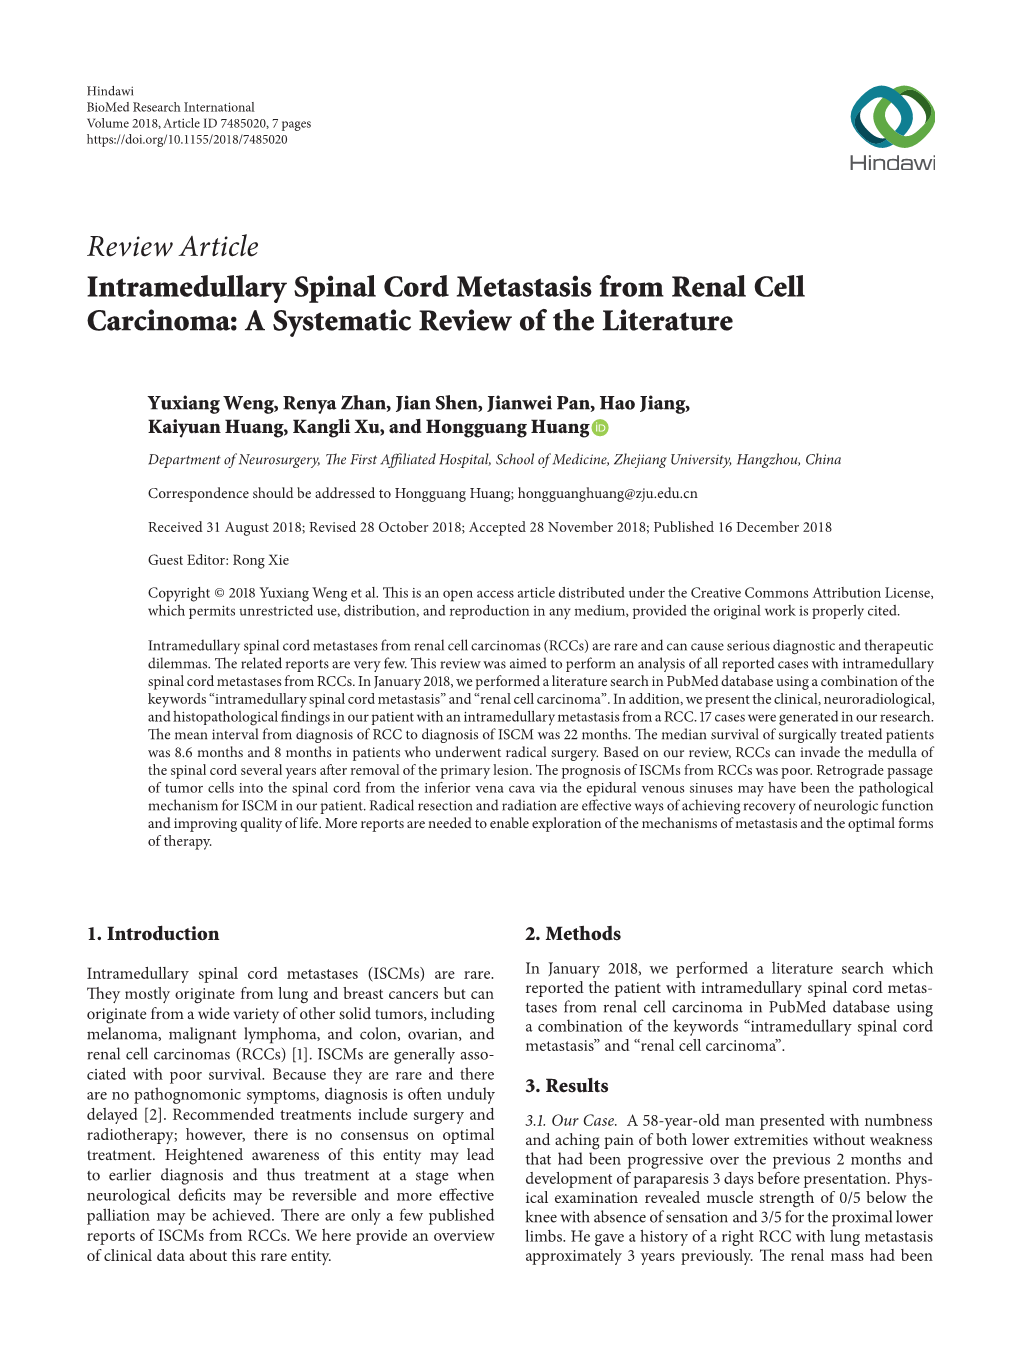 Review Article Intramedullary Spinal Cord Metastasis from Renal Cell Carcinoma: a Systematic Review of the Literature